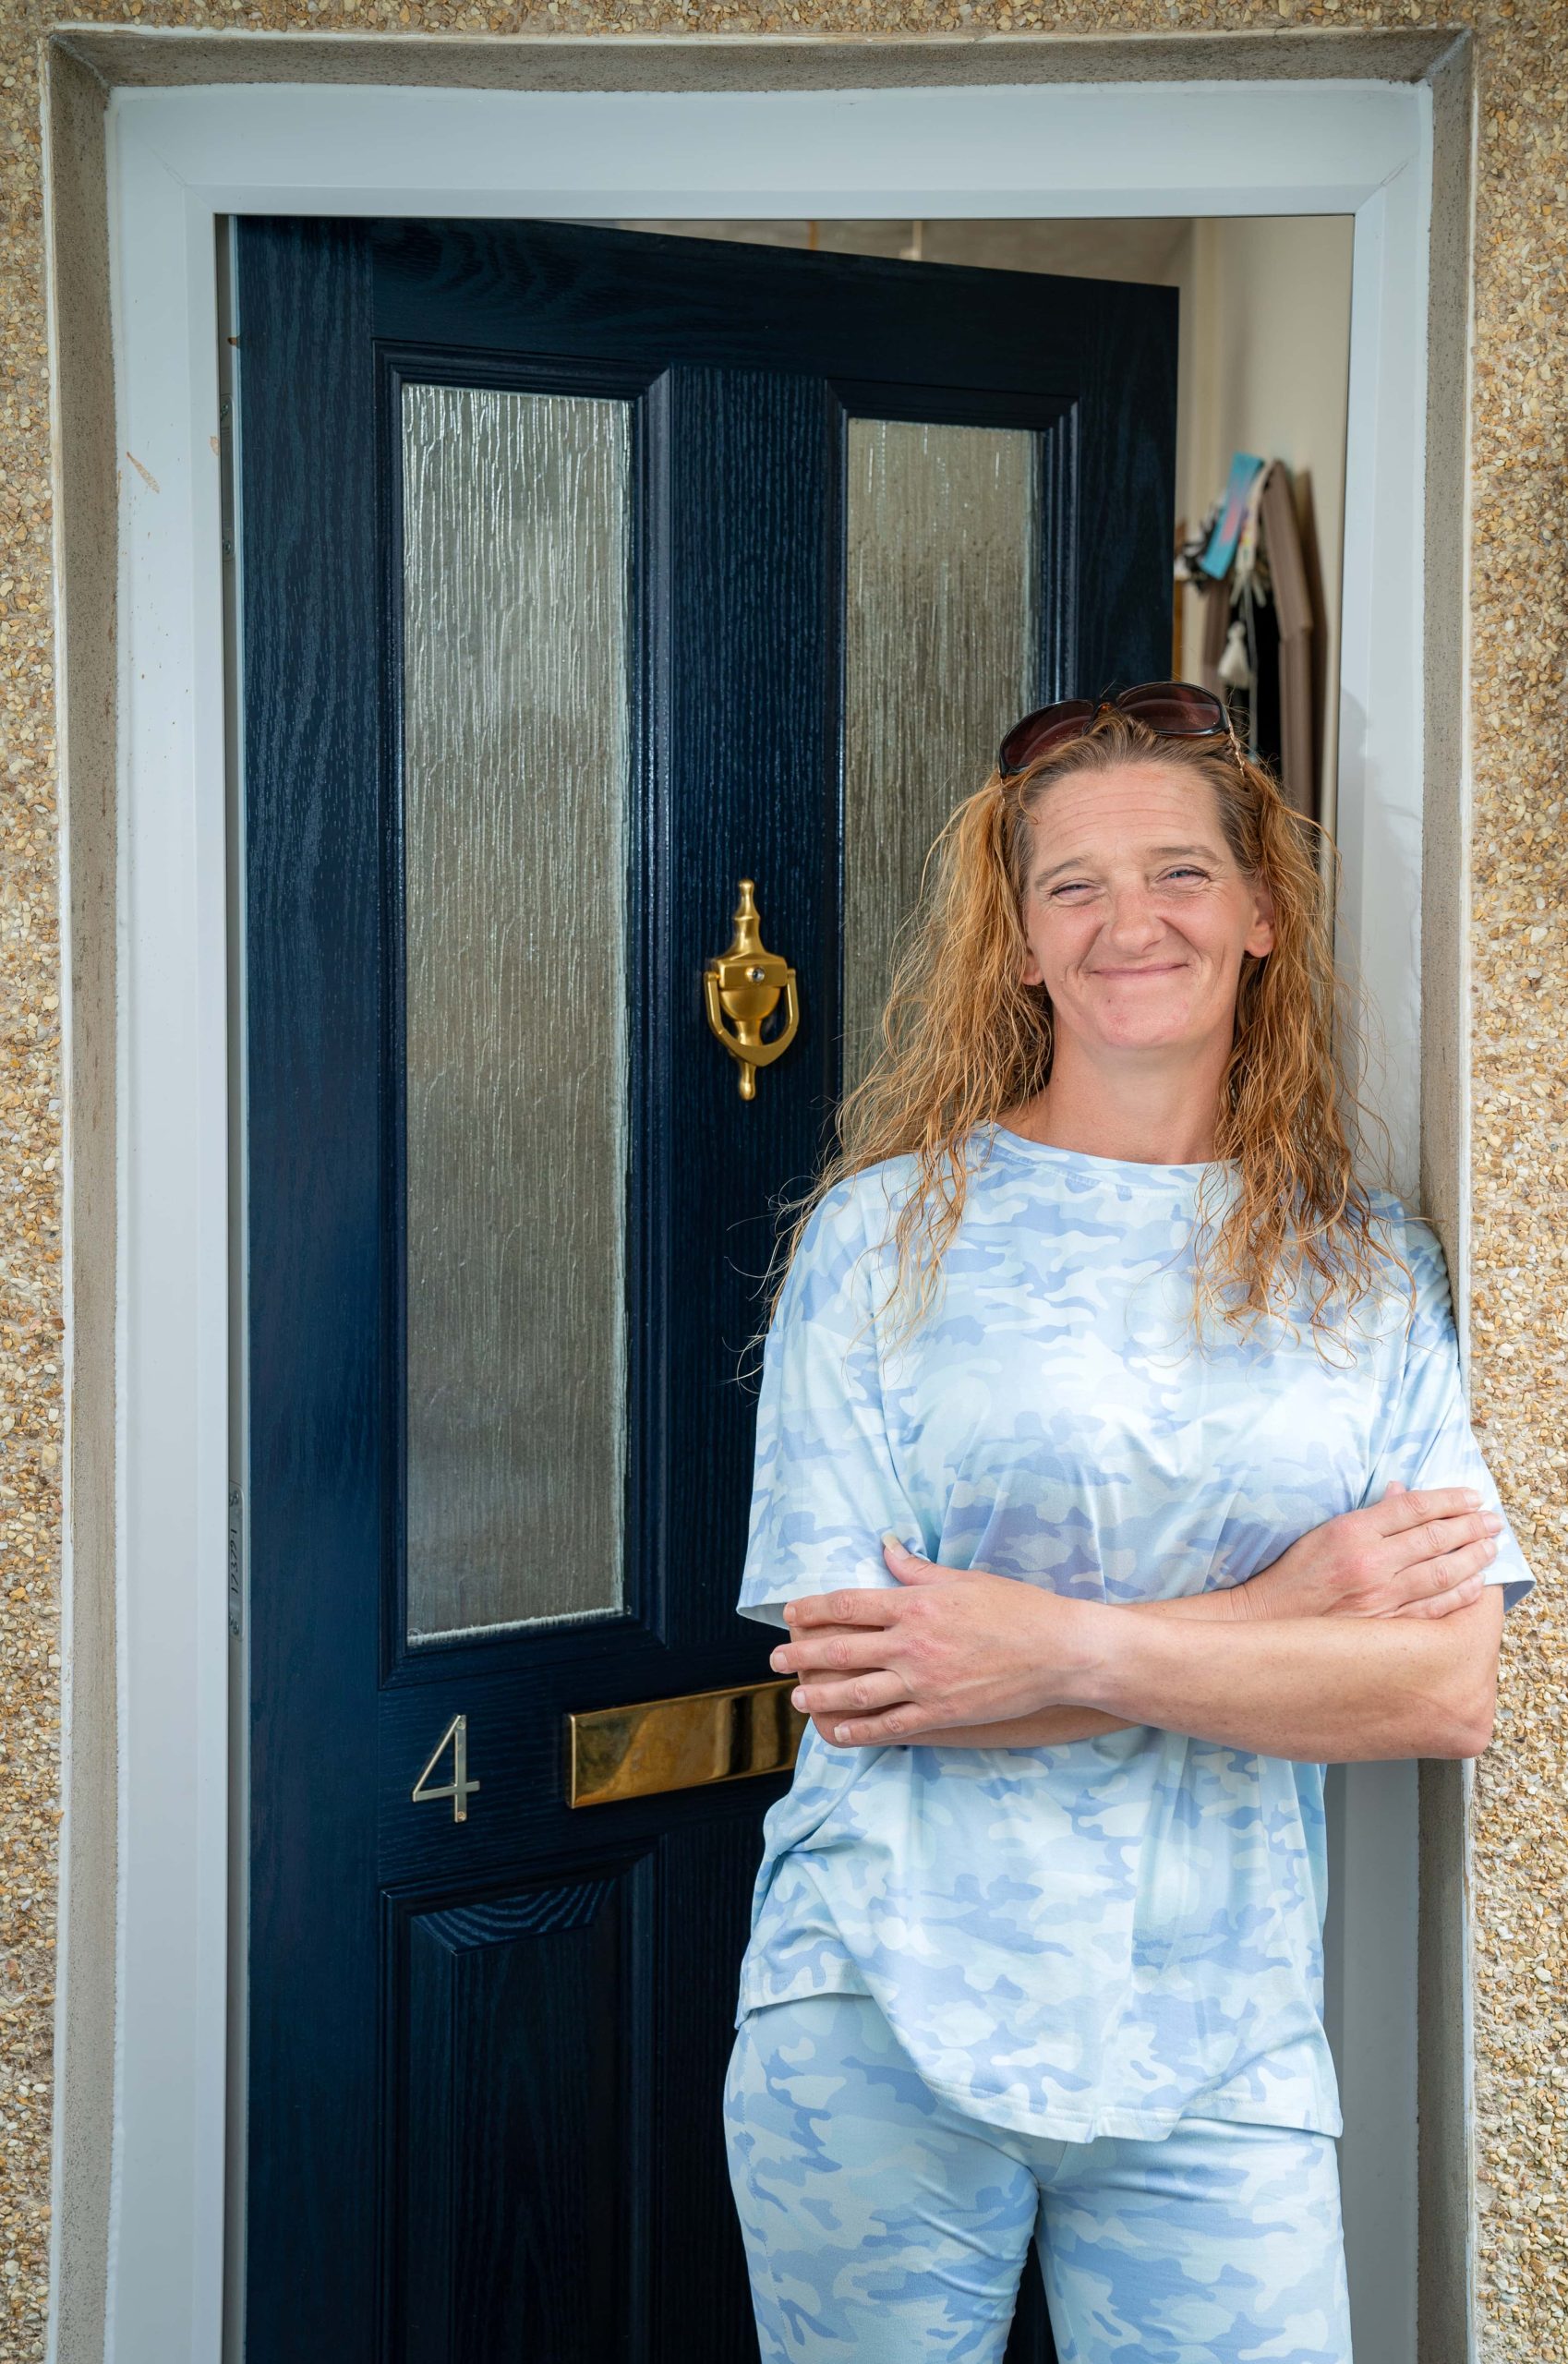 Trivallis Housing Landlord Wales A woman with long hair, wearing a blue and white patterned outfit, stands smiling with her arms crossed in front of a dark blue door marked with the number 4, emblematic of Triv